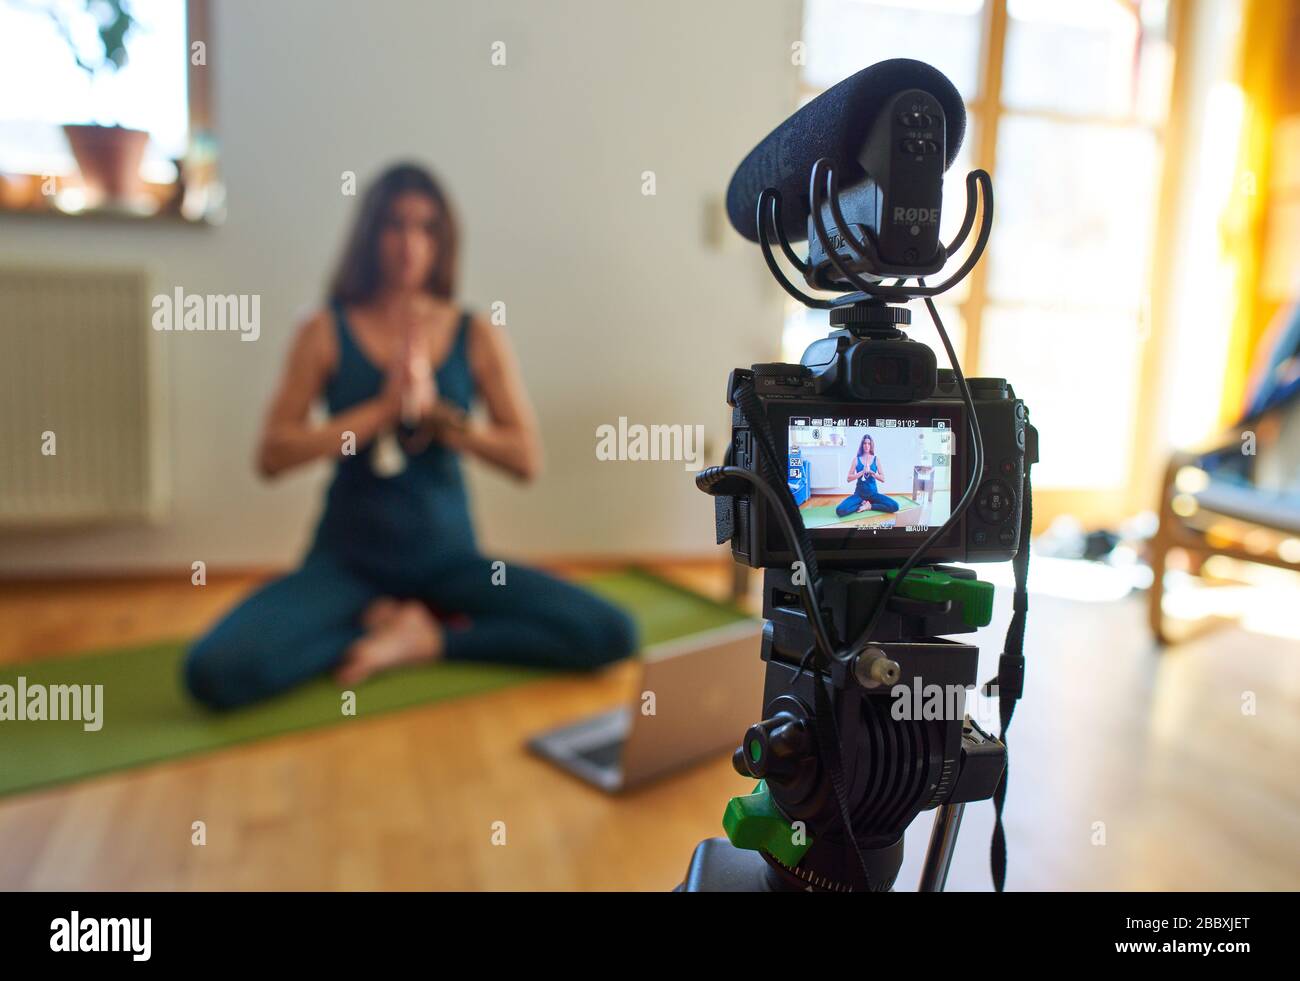 Kaufbeuren, Germany, April 01, 2020. Yoga teacher teaches customers in a online course and live streaming with computer and iphone due to the Corona virus disease (COVID-19) on April 01, 2020 in Kaufbeuren, Germany  Model released © Peter Schatz / Alamy Live News Stock Photo